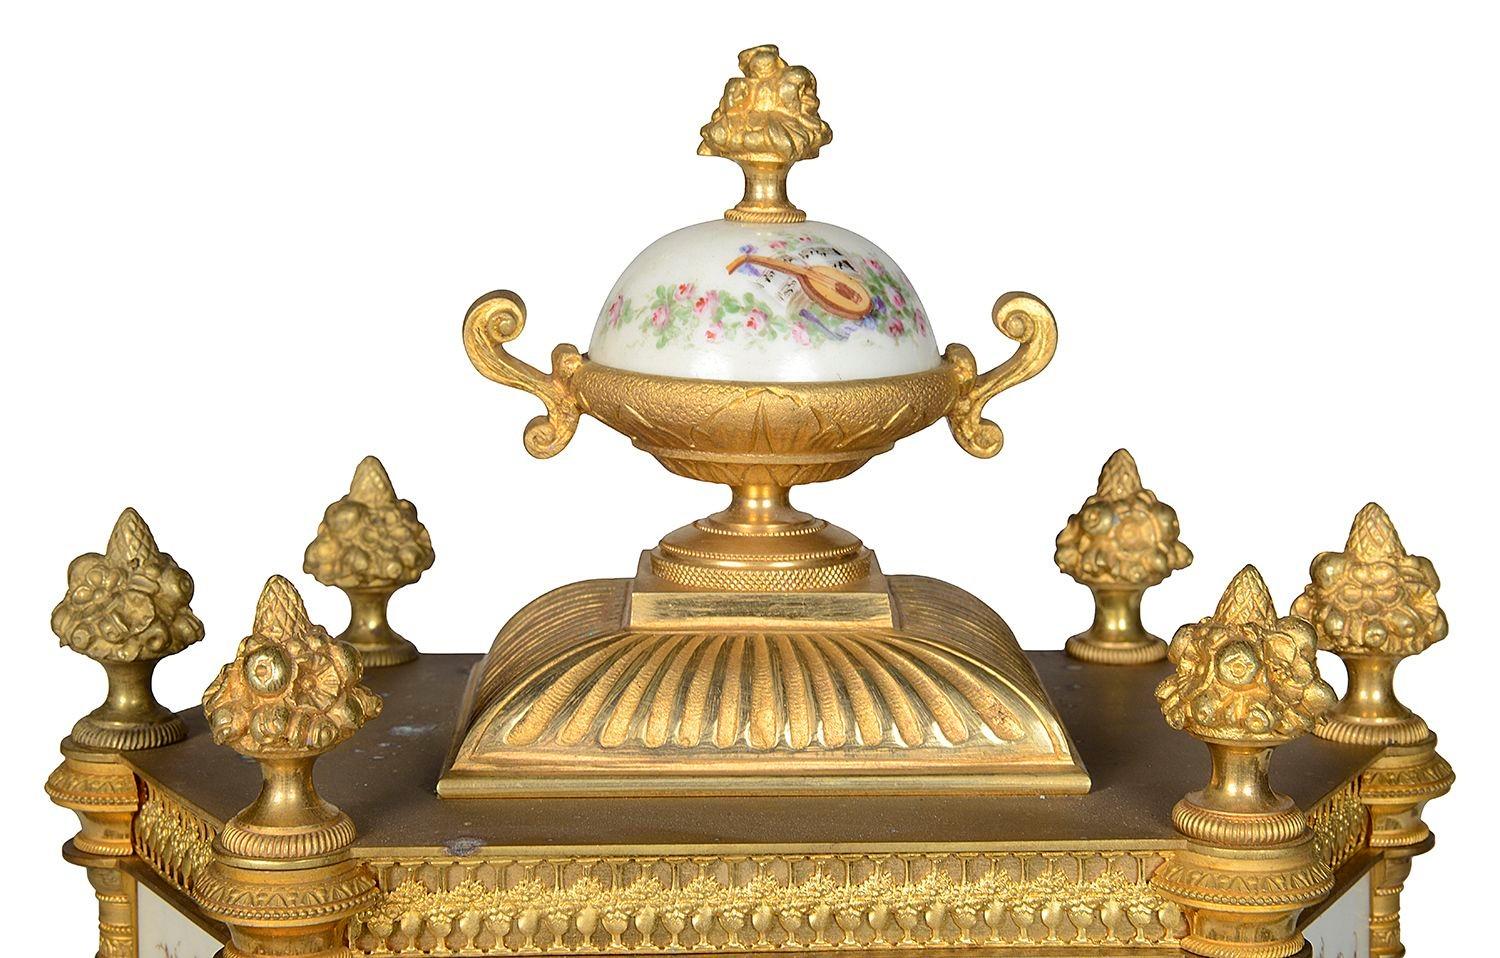 A fine quality late 19th Century French gilded ormolu mantel clock with hand painted Sevres style porcelain plaques, depicting beautiful maidens. Having a porcelain lidded urn to the top, six gilded fruit like finials, a porcelain painted clock face